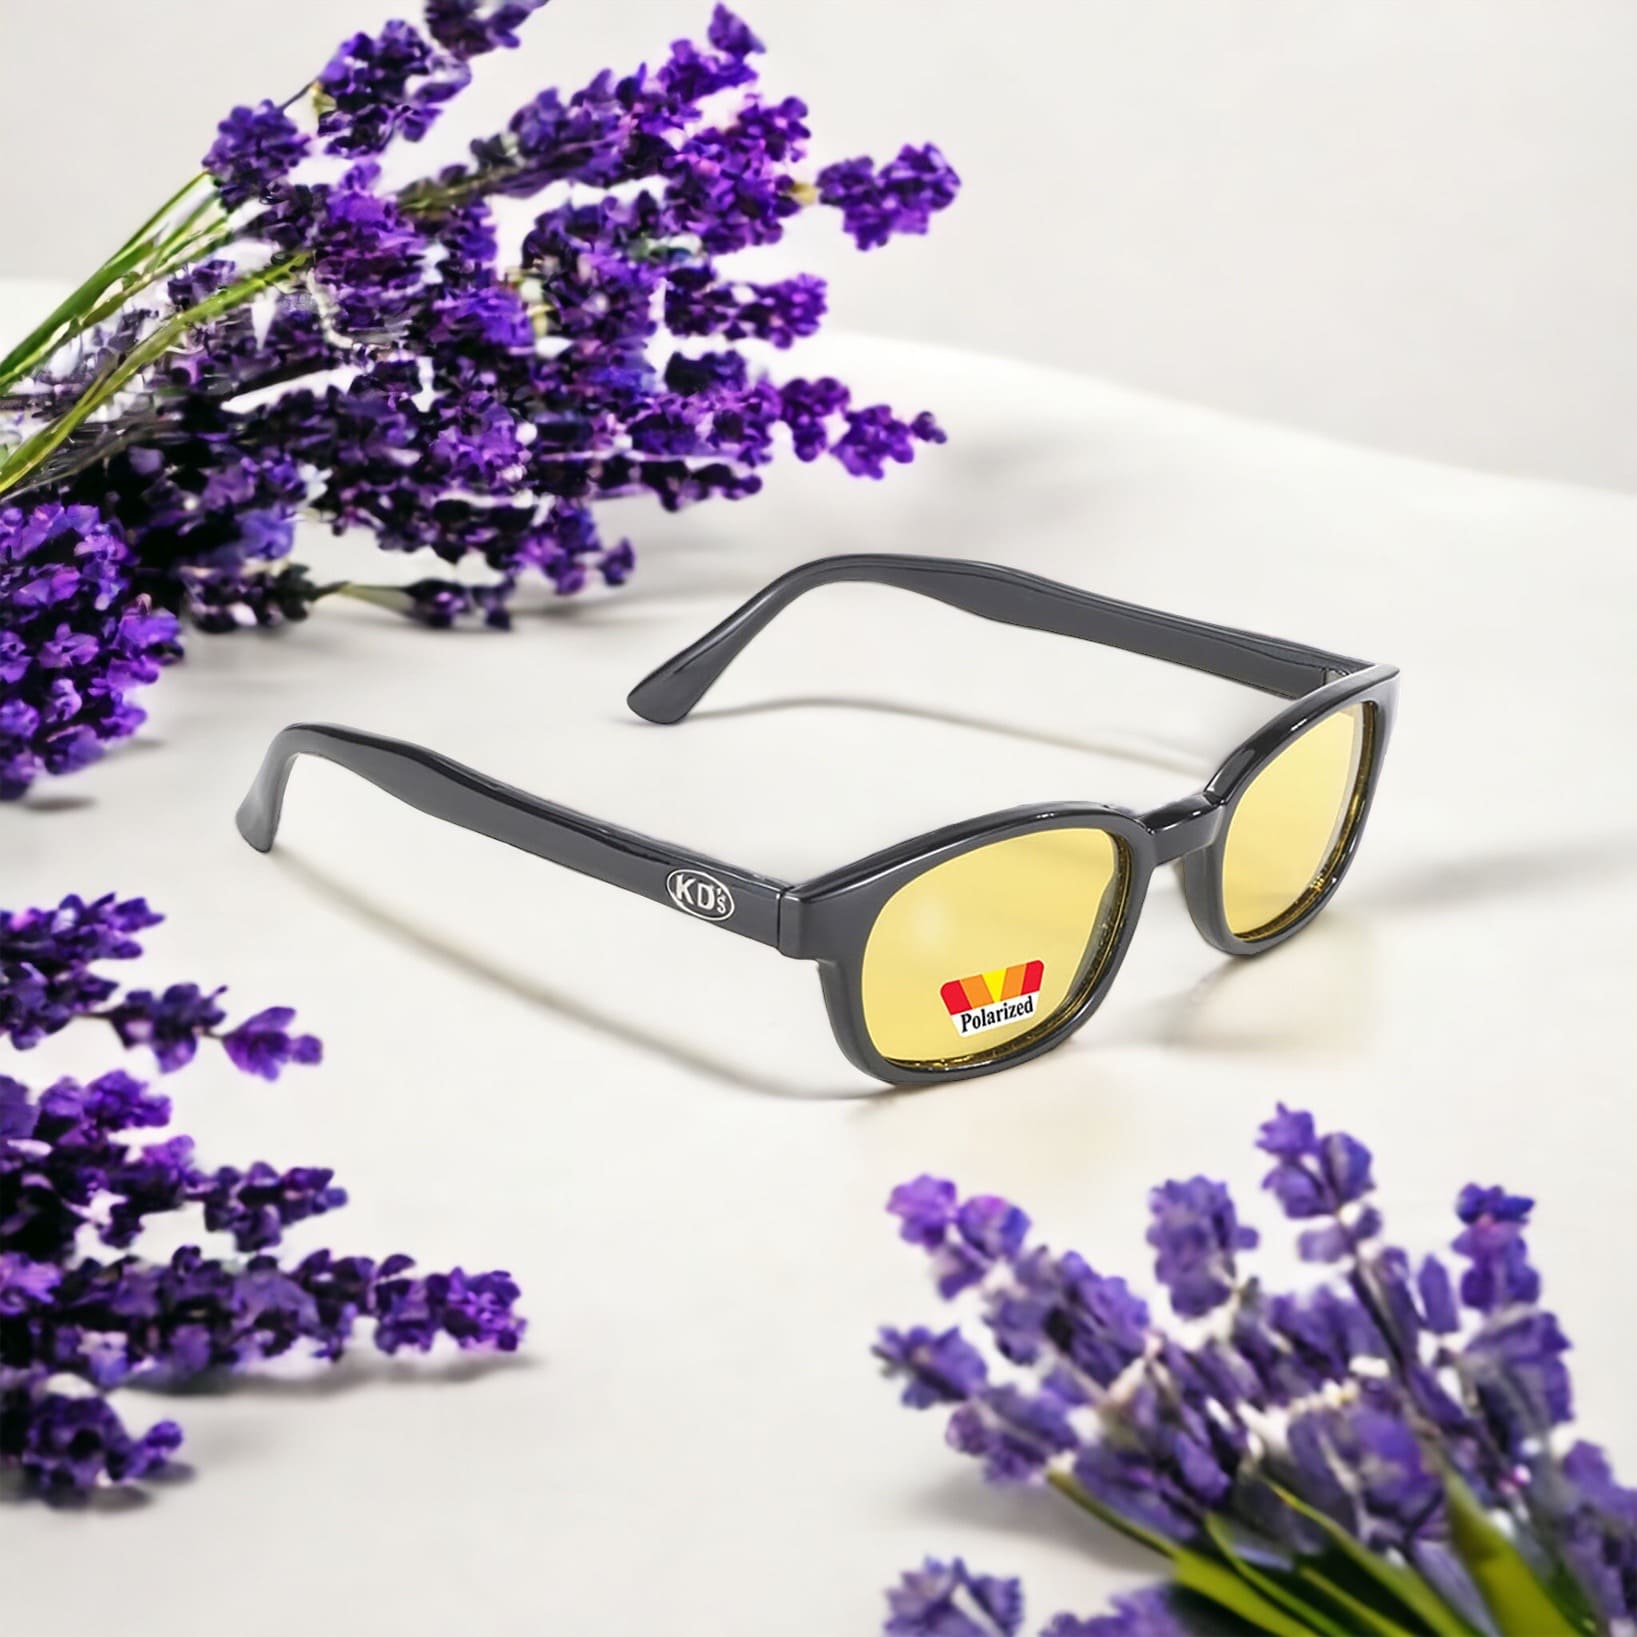 KD's 20129 sunglasses that fit under a motorcycle or ski helmet. For bikers and sportsmen. With a durable black frame and polarized yellow tinted lenses. Placed on a white table surrounded by lavender.